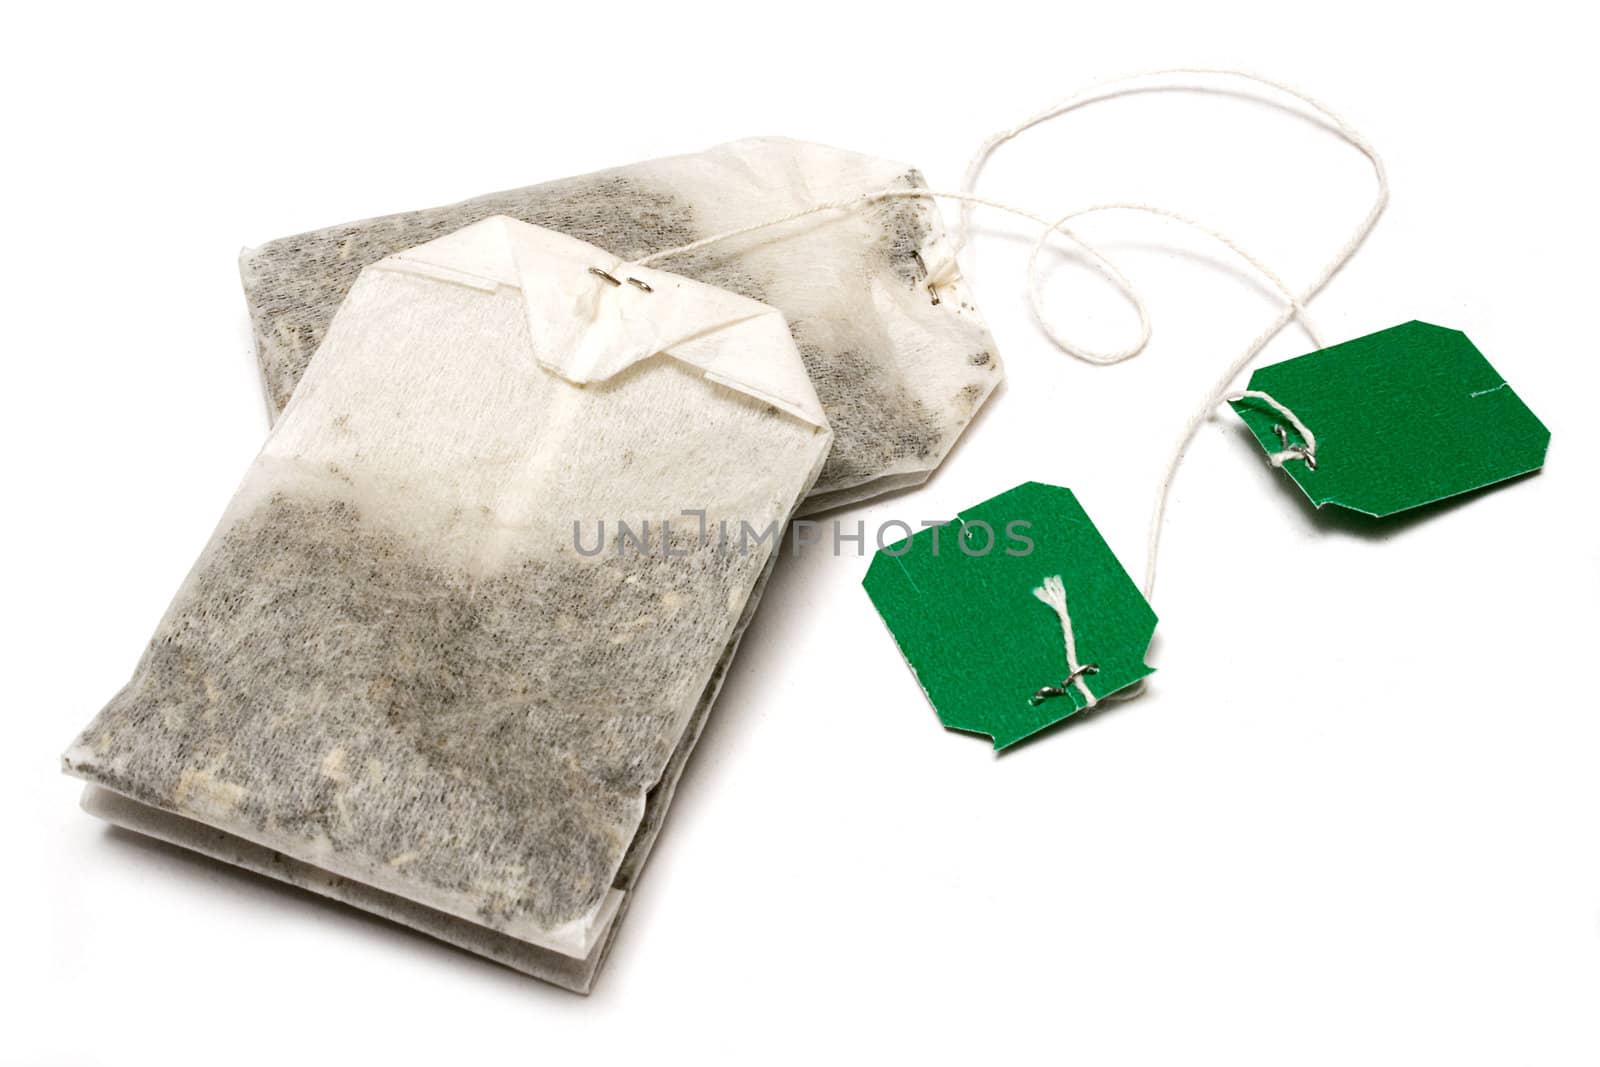 Two dry teabags with green tag isolated on a white background.